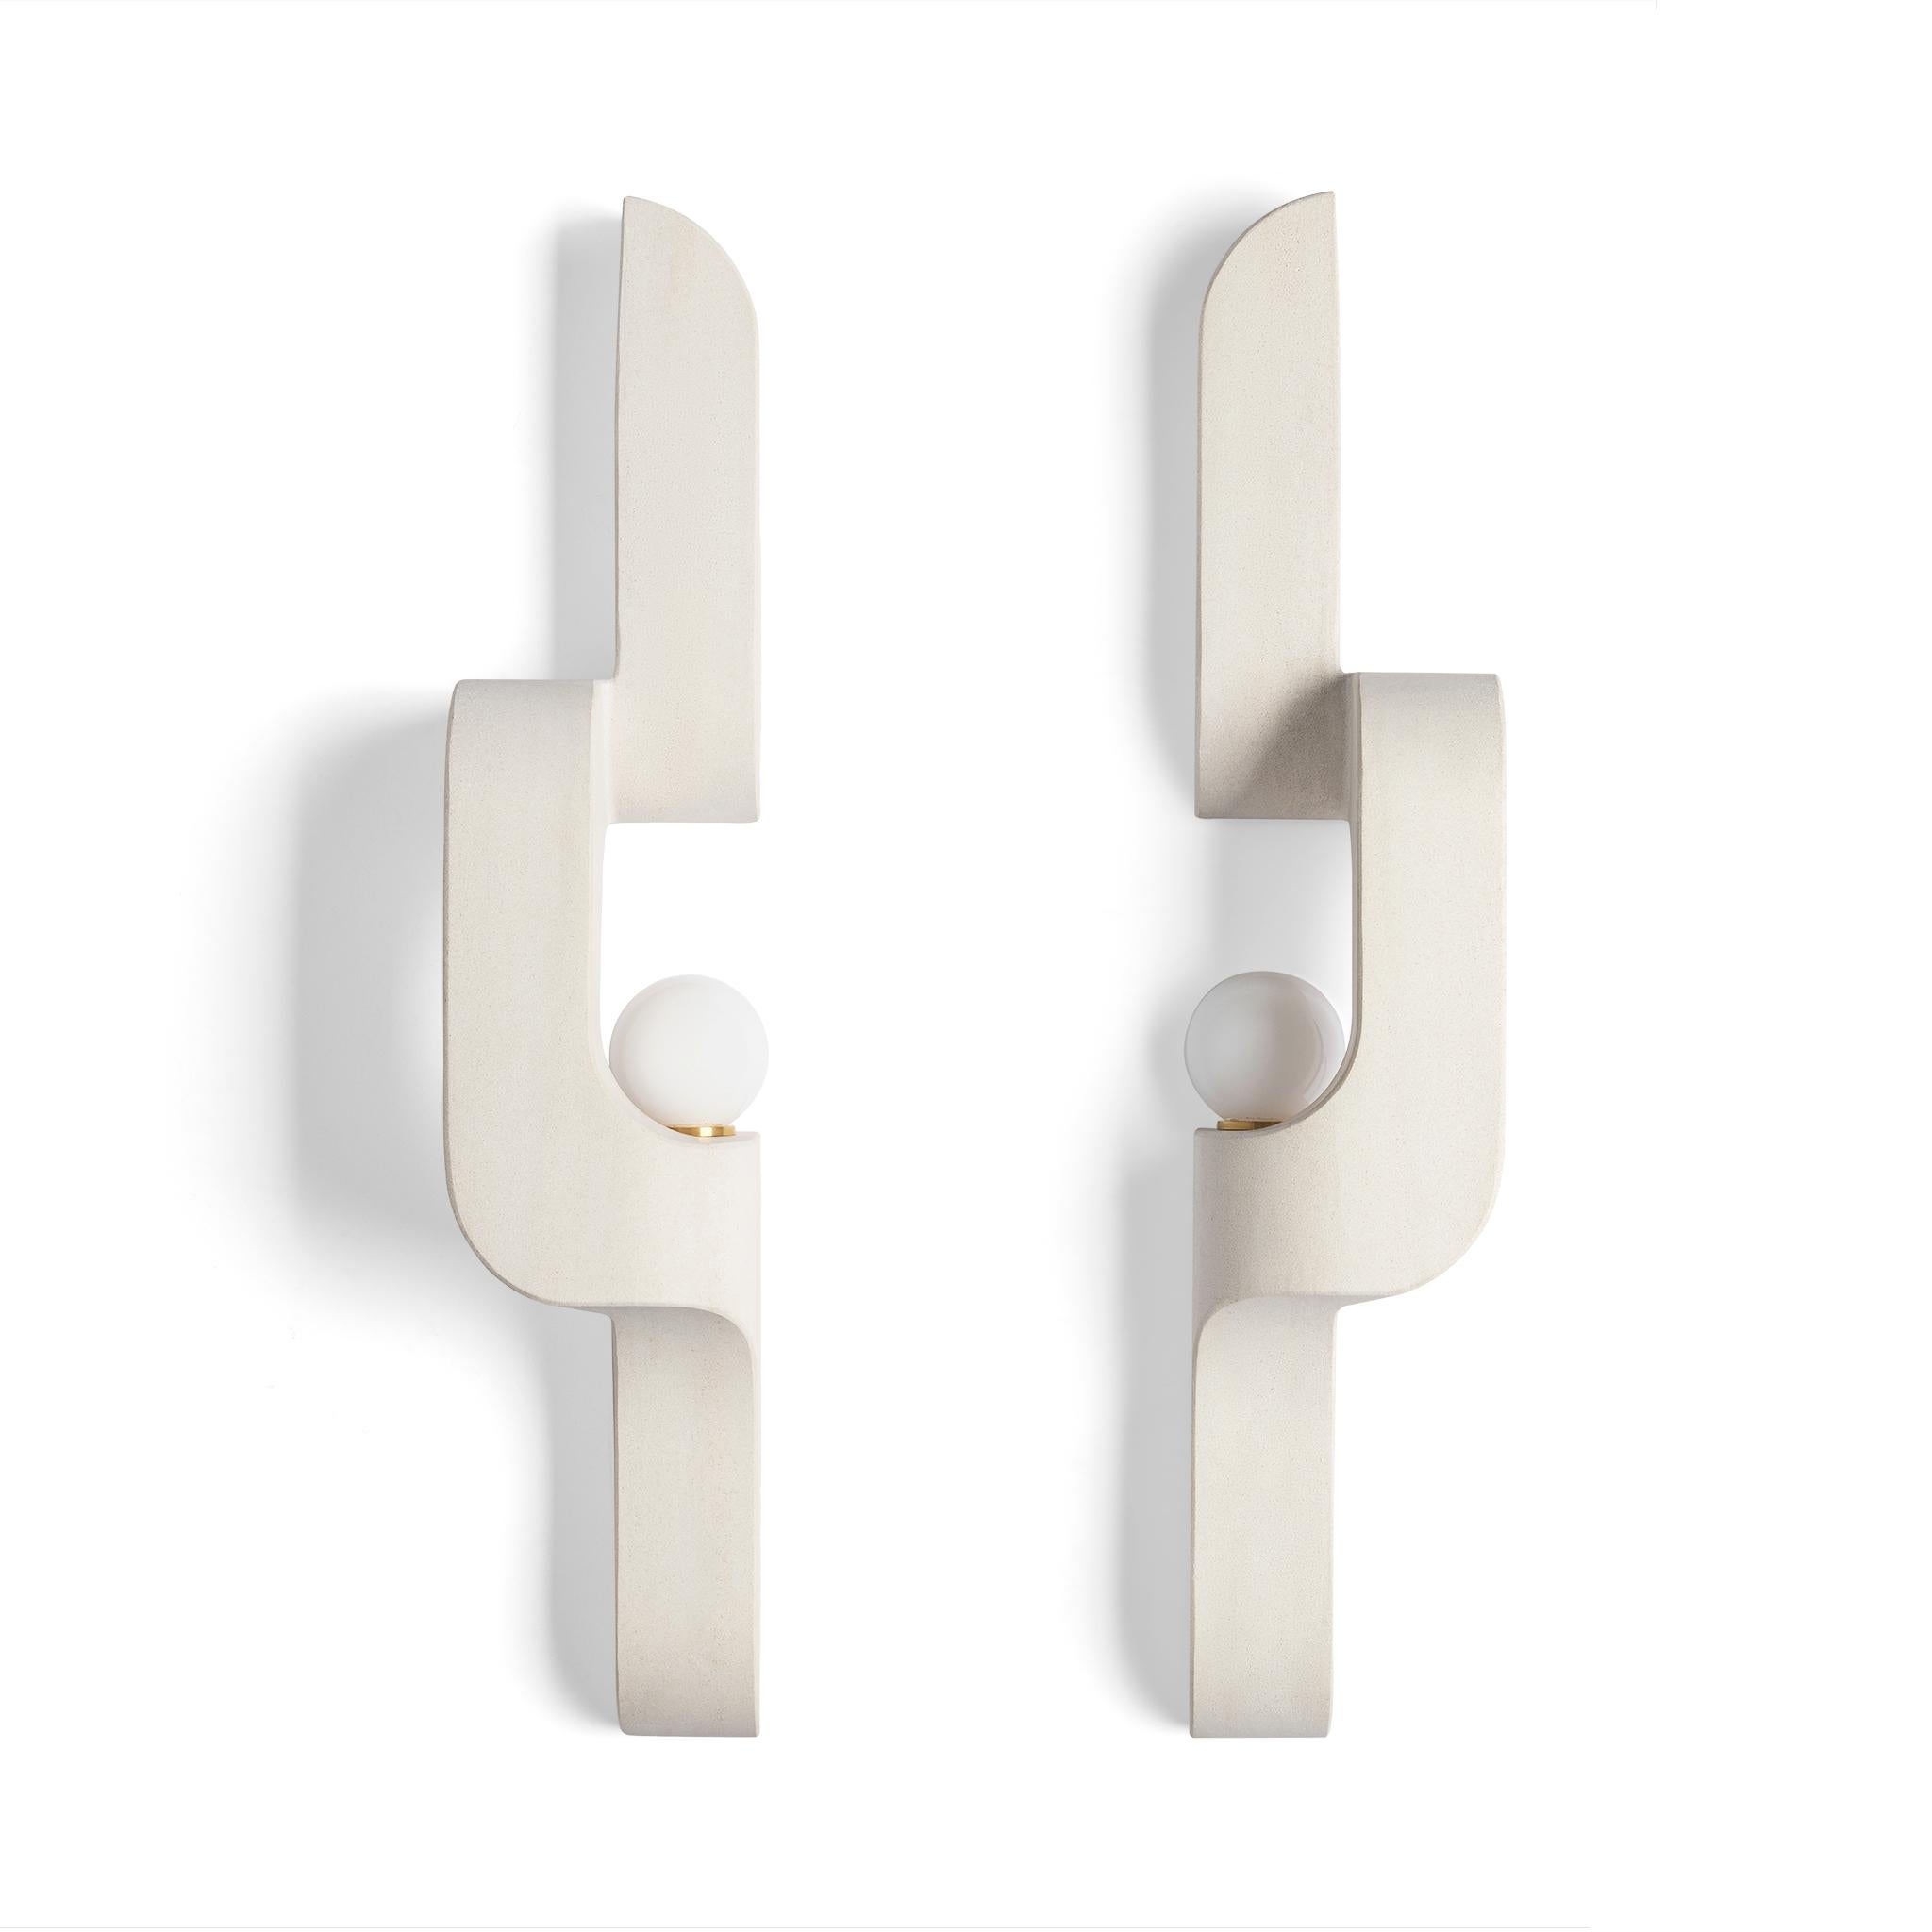 In this solid stone wall sconce, generous curves are paired with crisp edges and the repetition of geometry to create a flow. The sconce snakes up and off the wall, a sculptural lighting piece that's understated, and almost artifact-like.

This